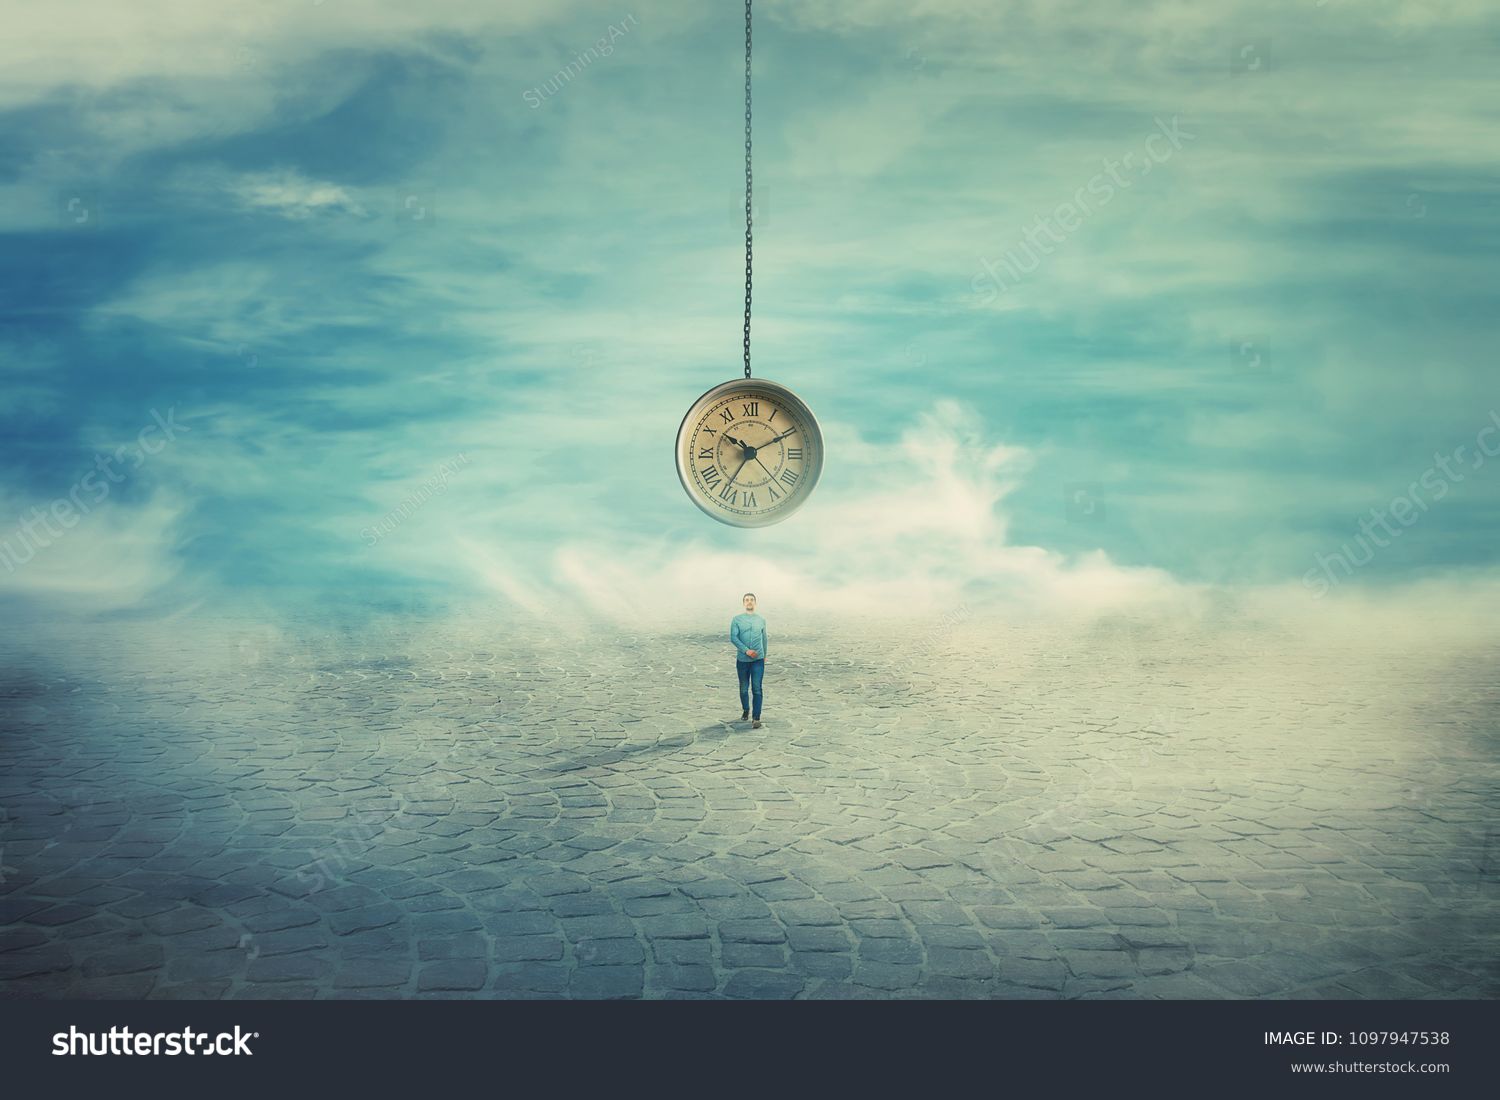 Surreal view as a man walking on a pavement road and a suspended clock on his back hanging from the sky. The importance of time in the modern world. Time travel concept. #1097947538